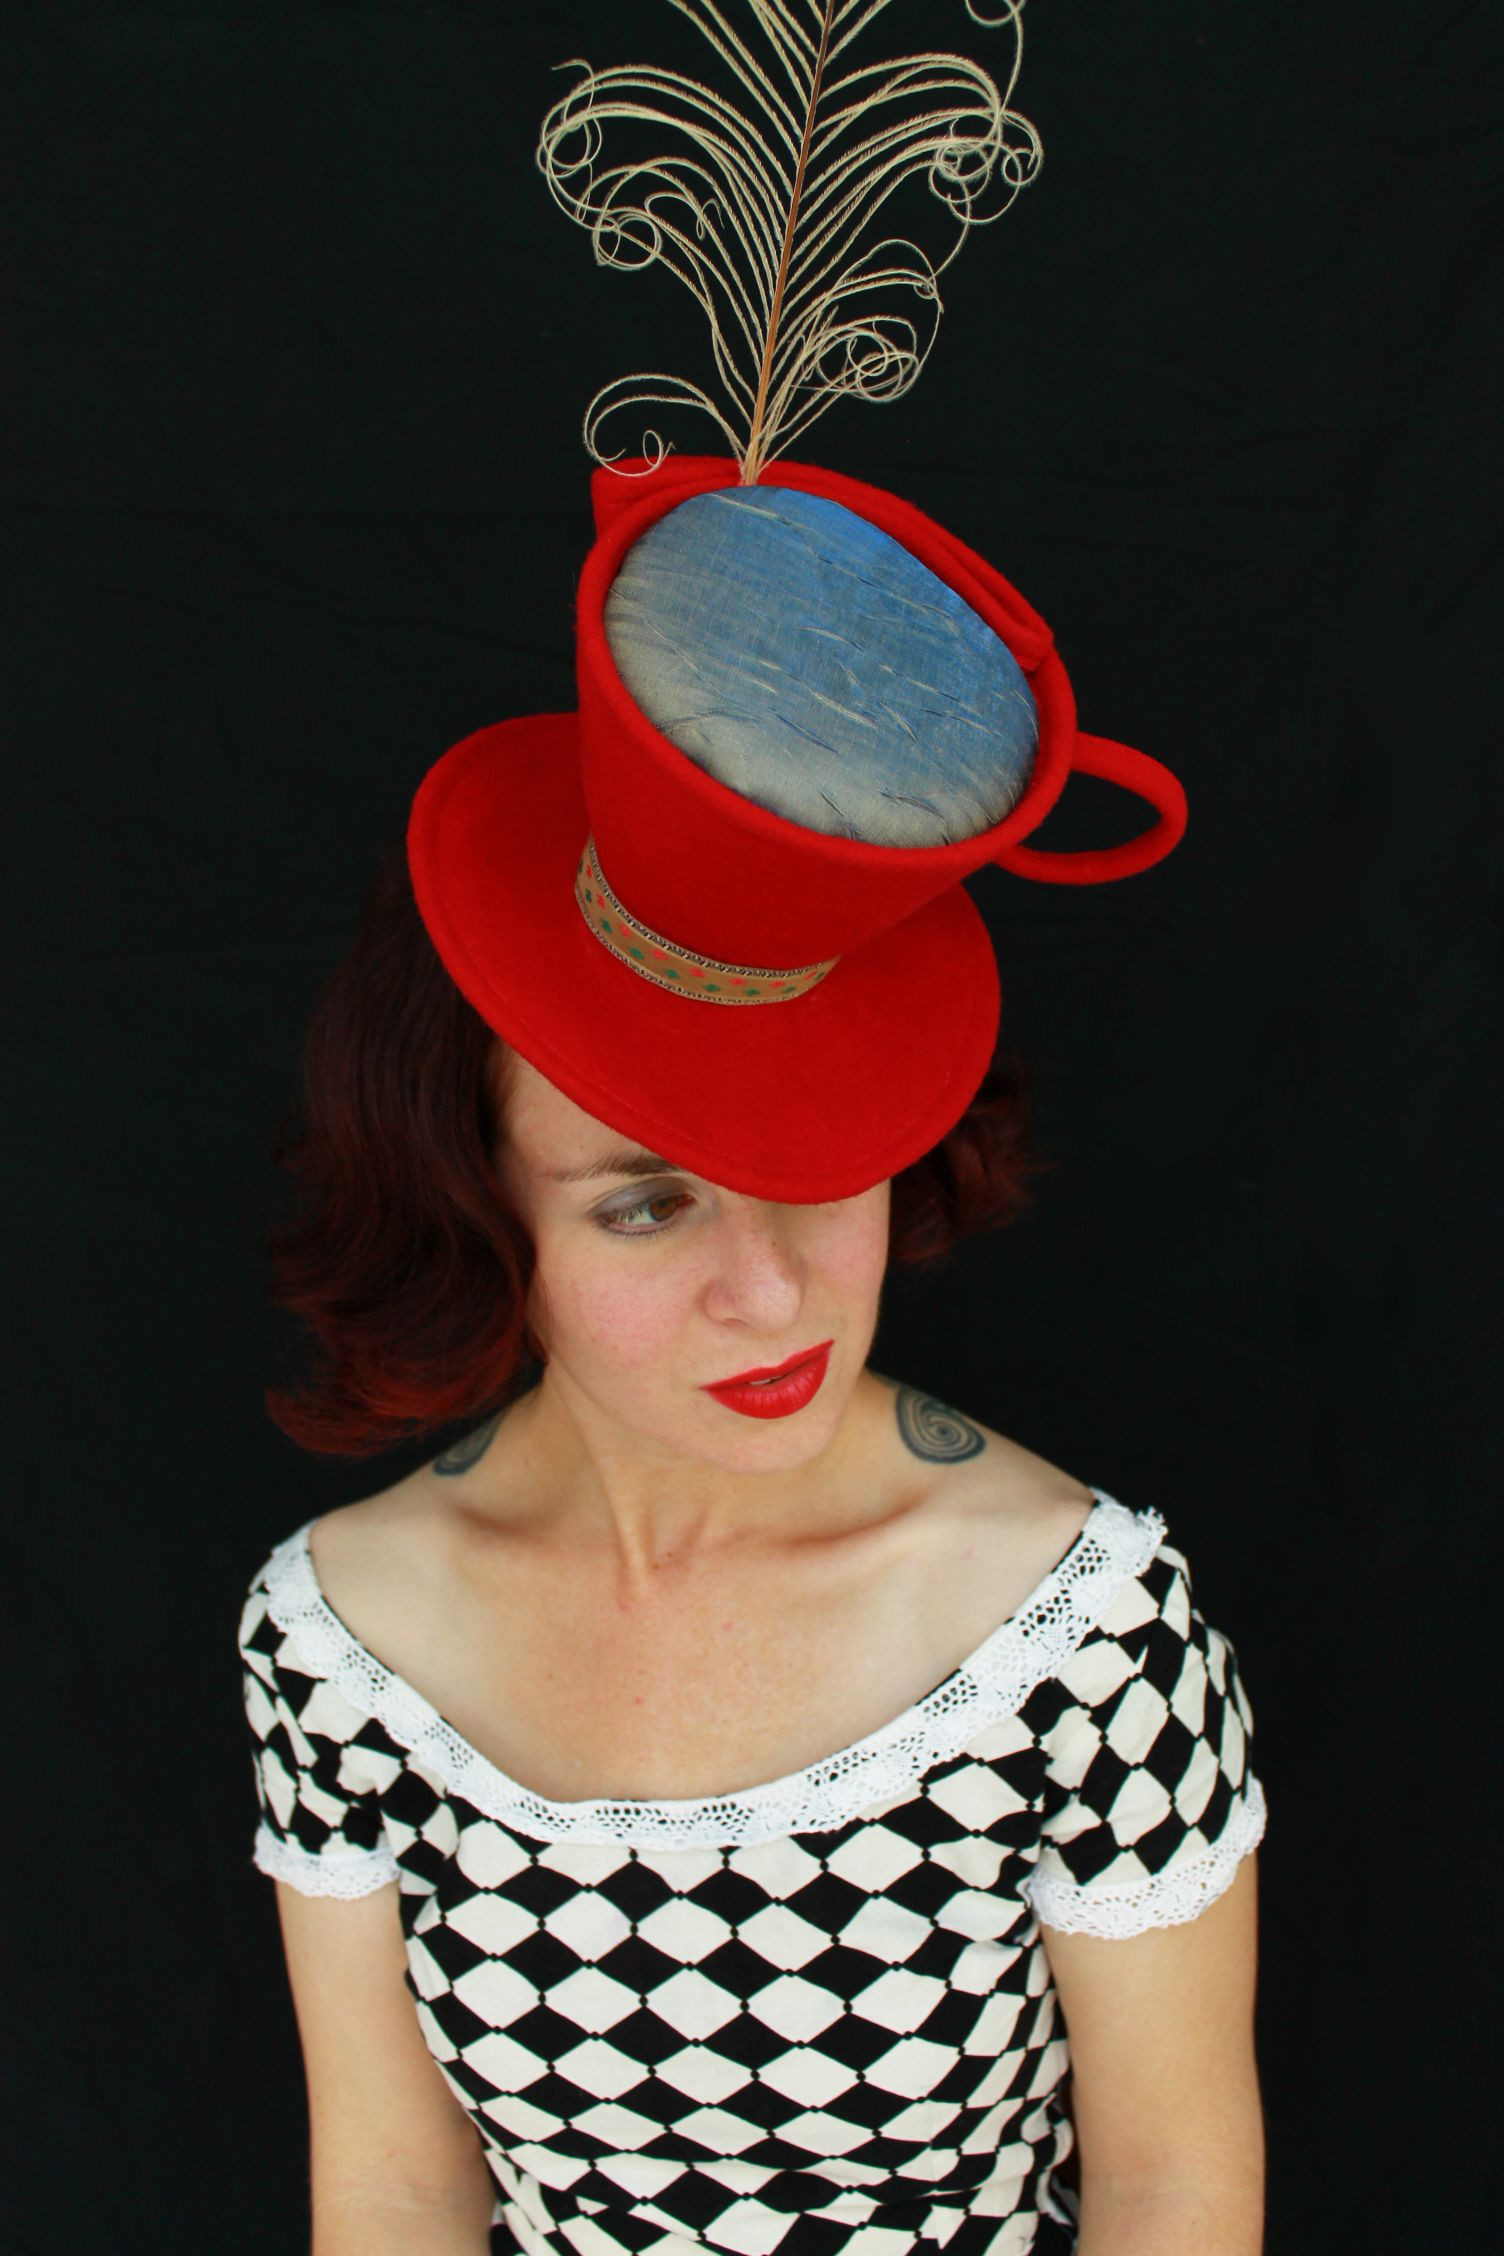 Mad Hatters Tea Party Costume Ideas
 Mad Hatter tea cup in red felt